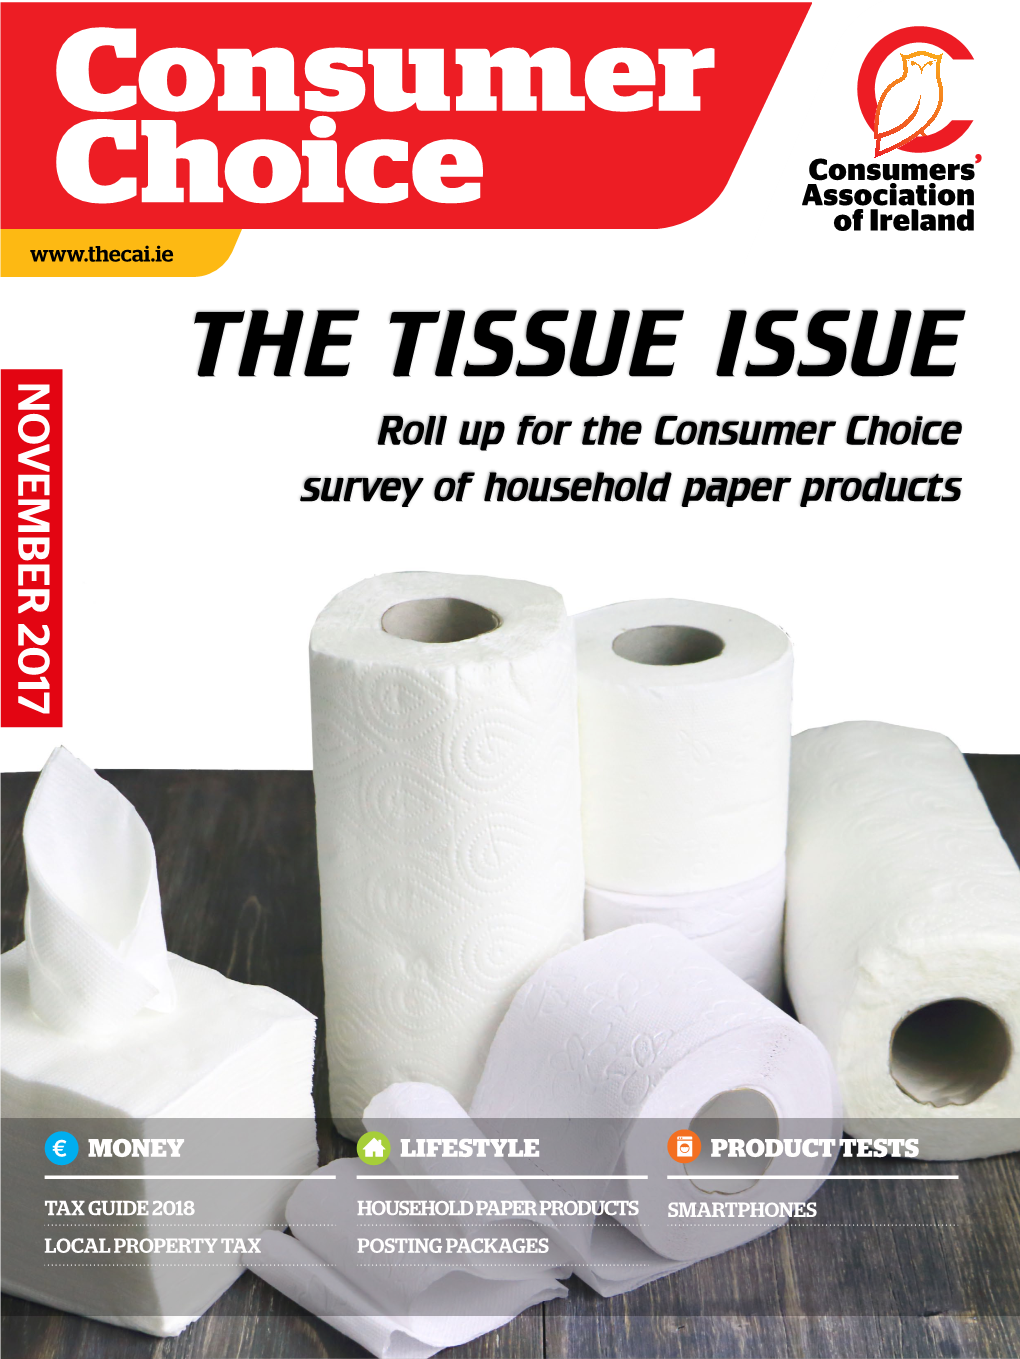 THE TISSUE ISSUE Roll up for the Consumer Choice Survey of Household Paper Products